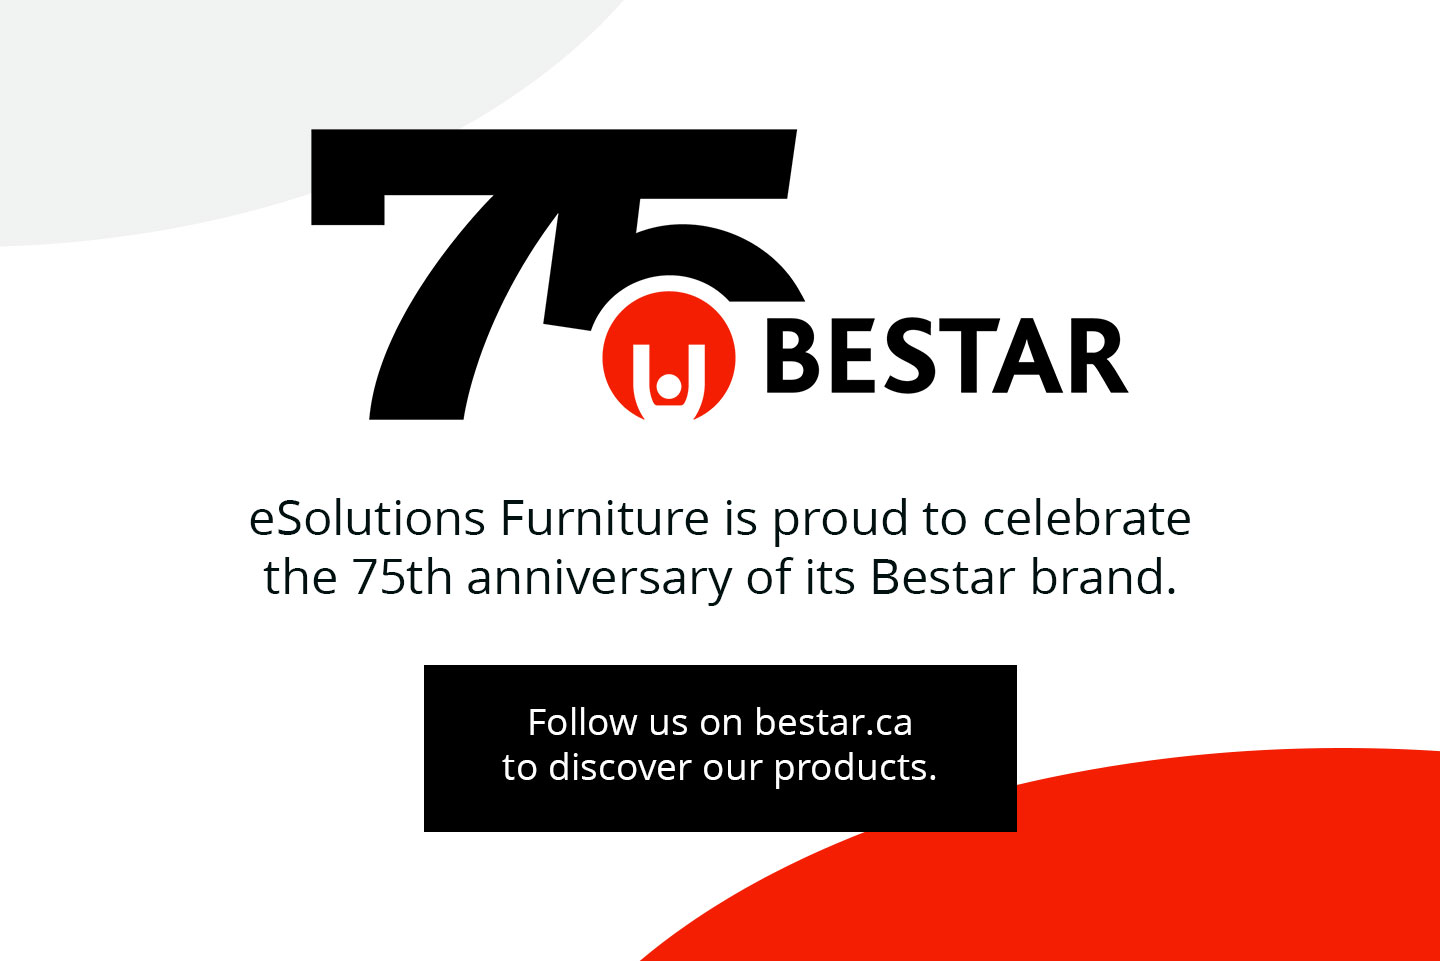 eSolutions Furniture is proud to celebrate the 75th anniversary of its Bestar brand